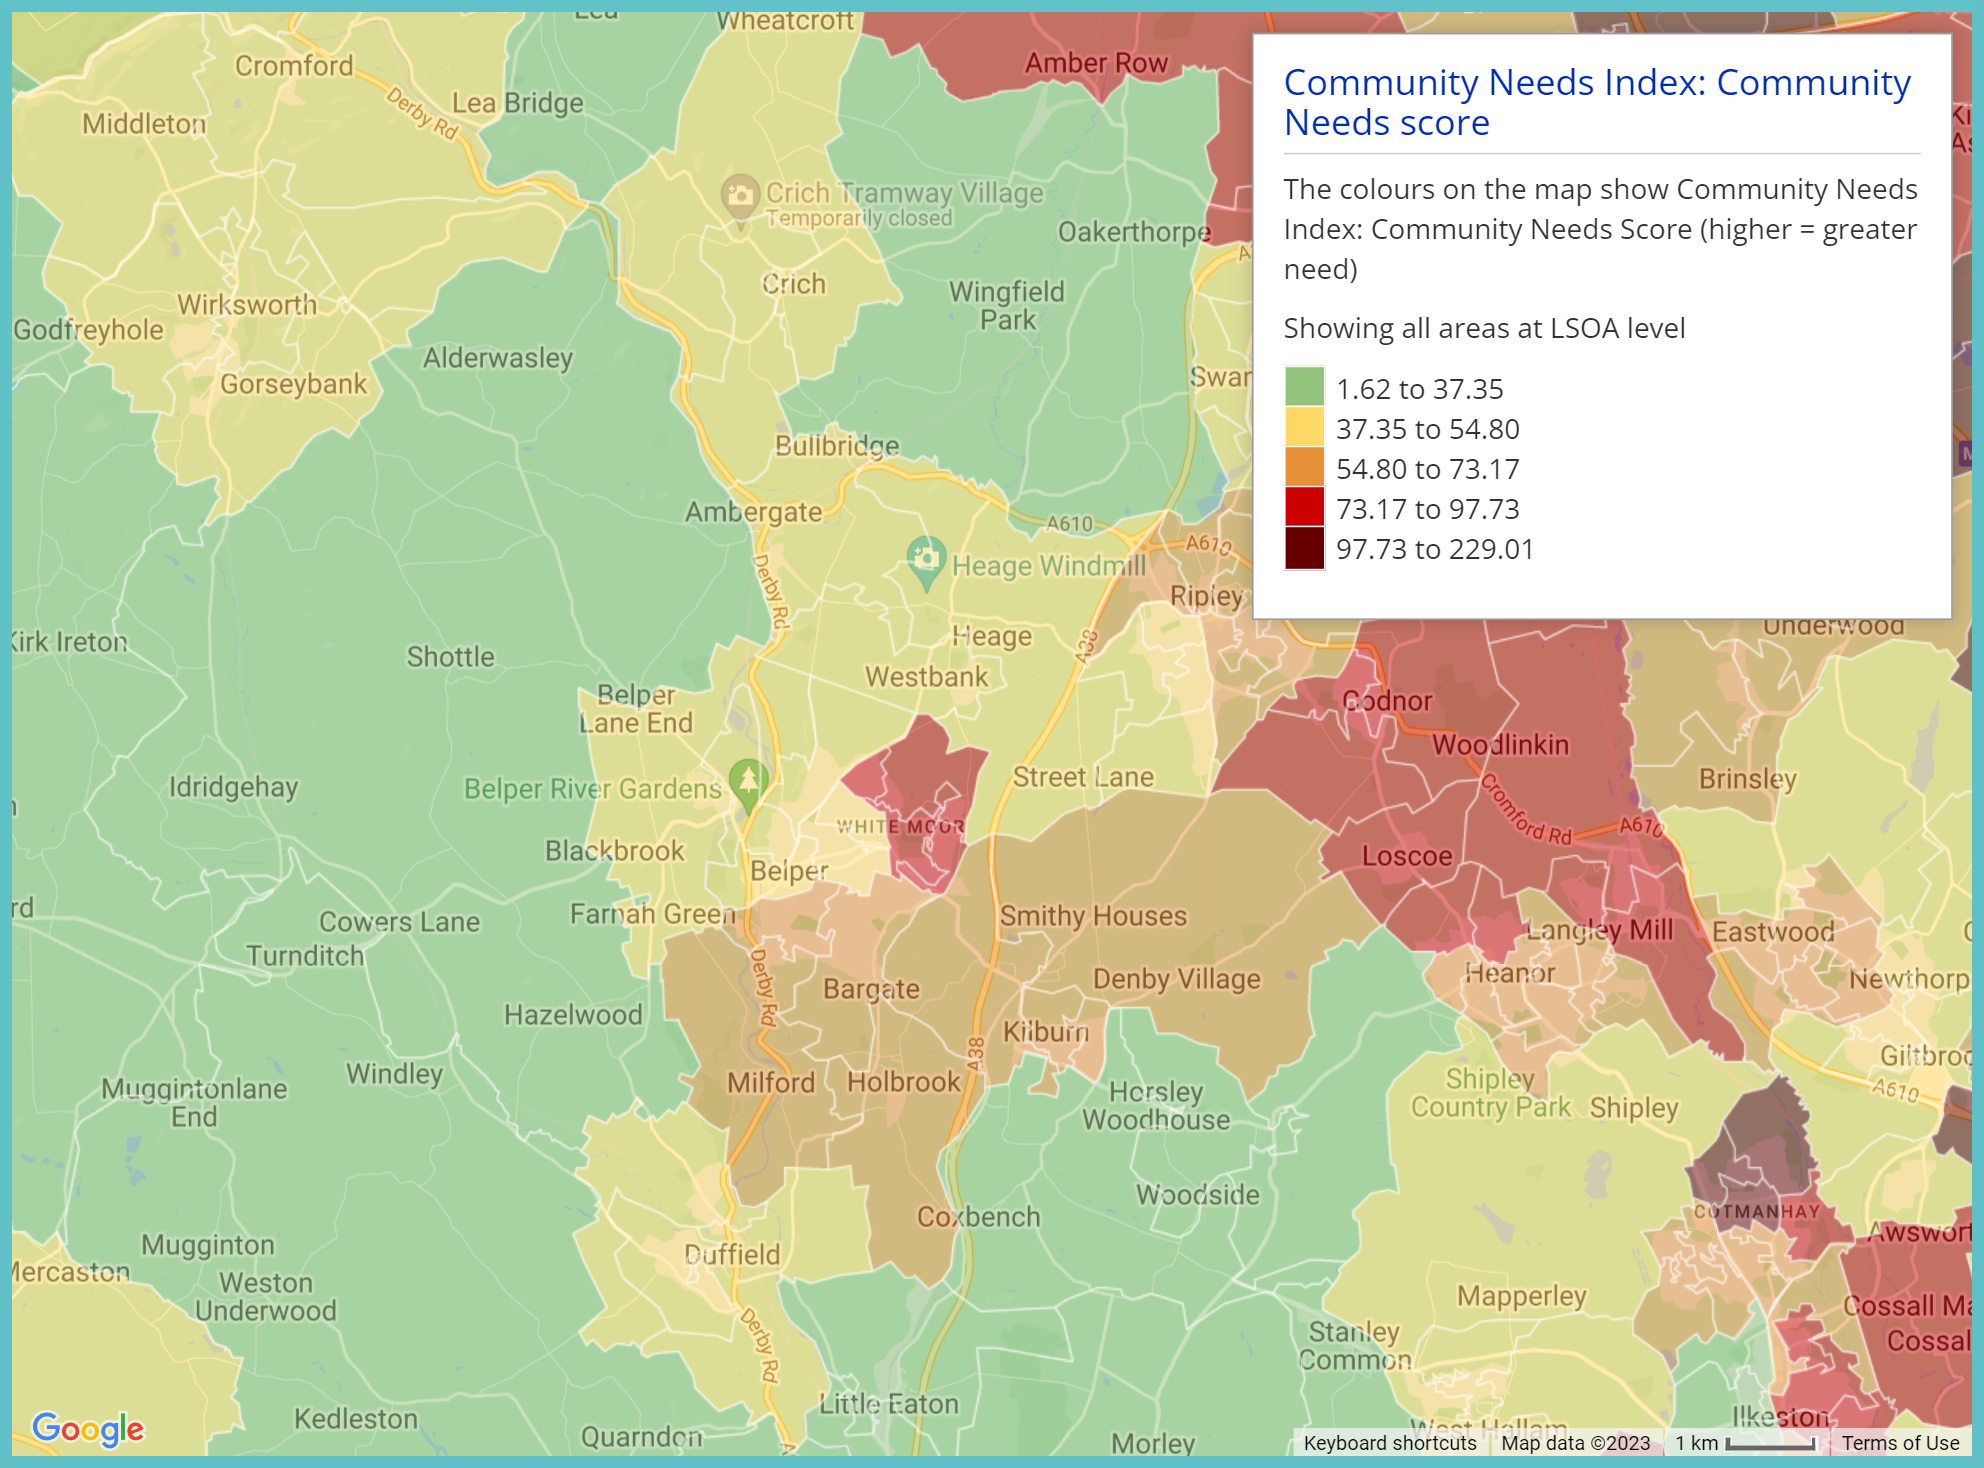 A screenshot of a choropleth map to provide an example of the Community Needs Index at LSOA level